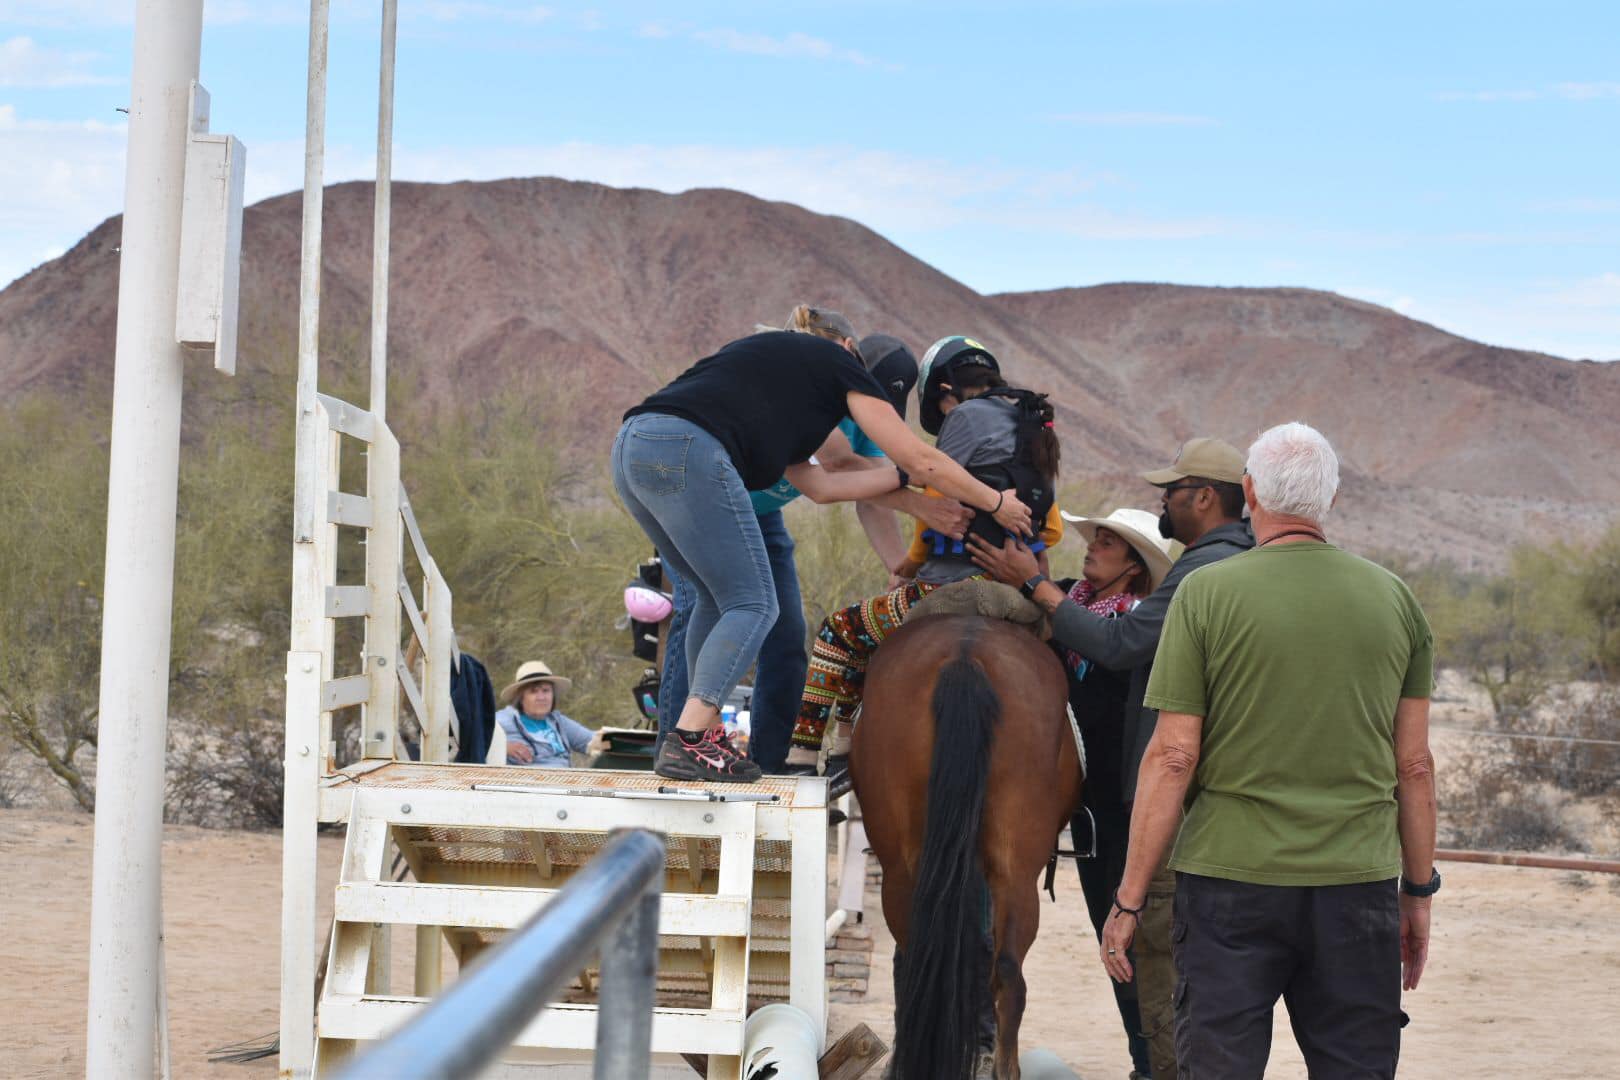 Assisting Jaqueline in mounting a horse